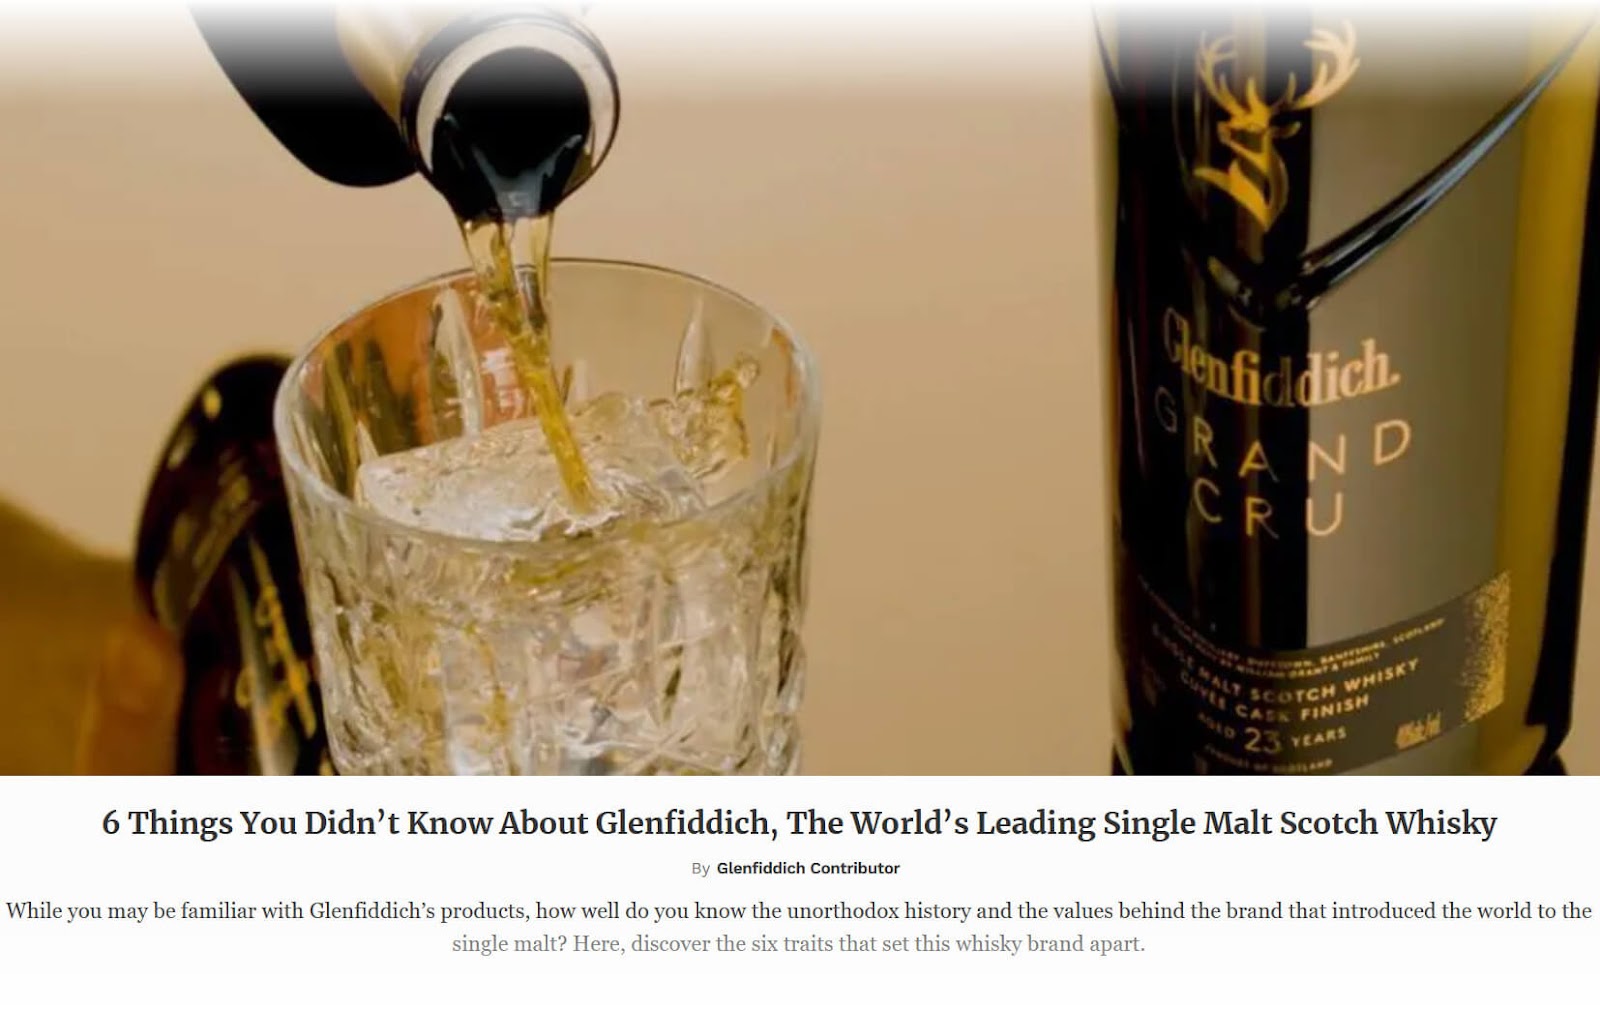 A sponsored post on Forbes, on Glenfiddich